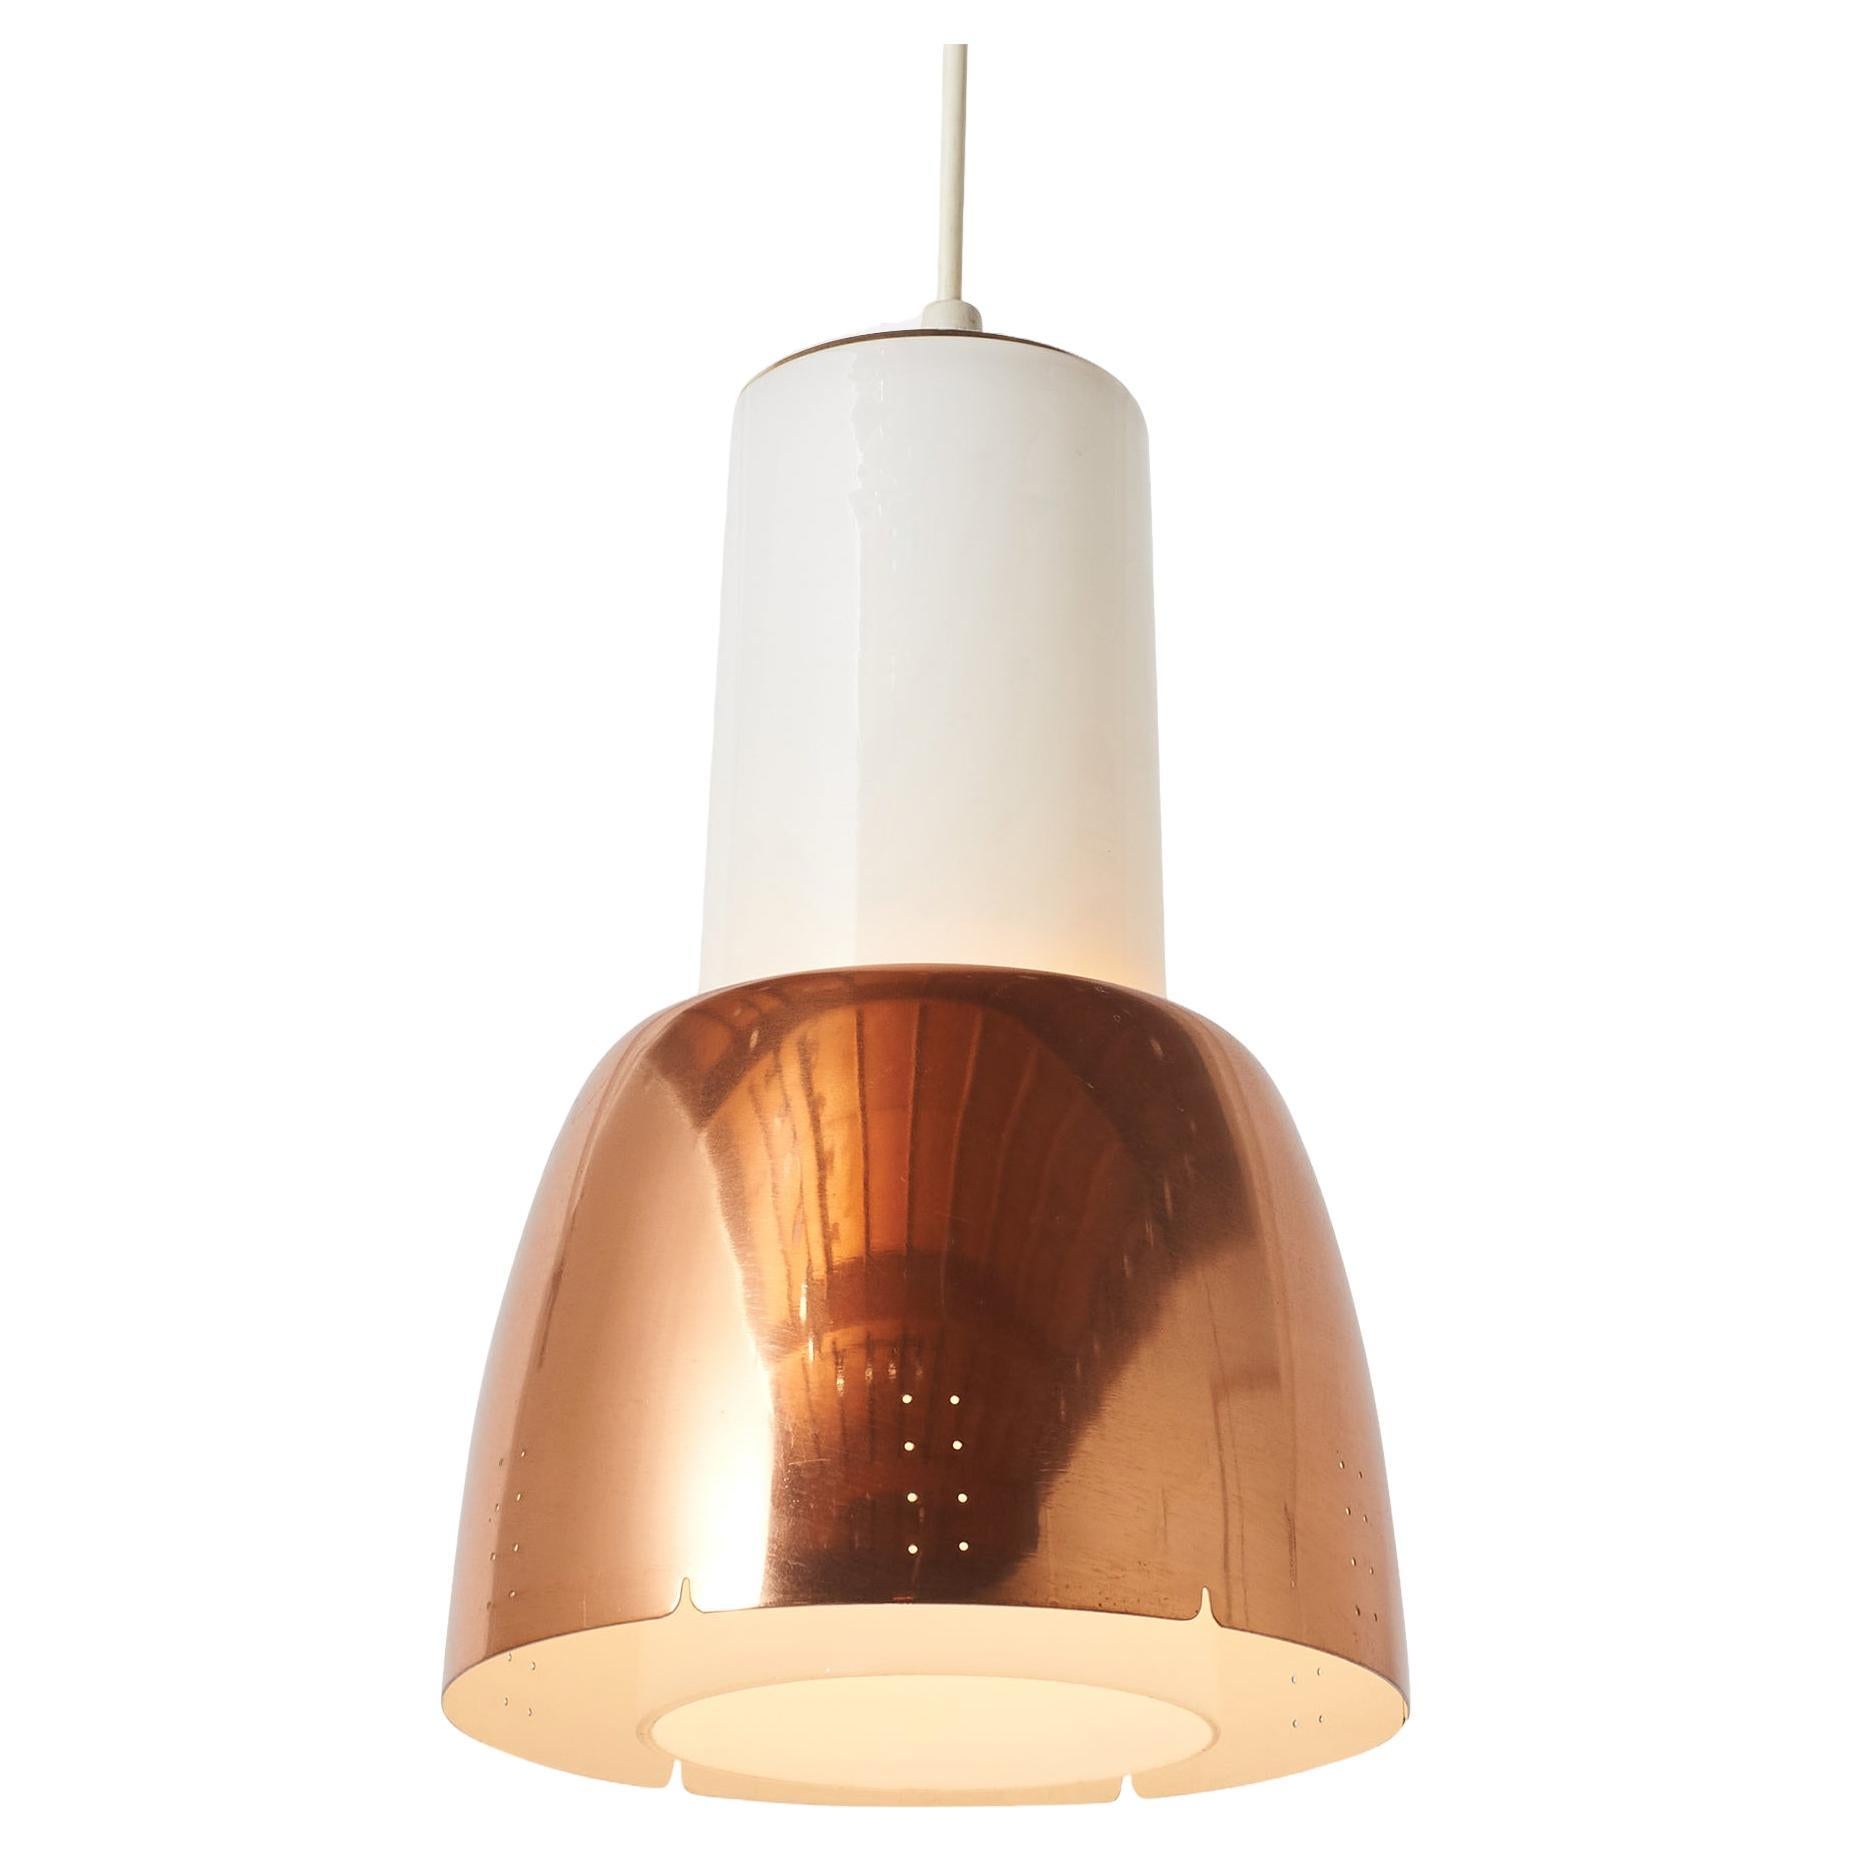 A model K2-16 pendant lamp by Paavo Tynell for Idman